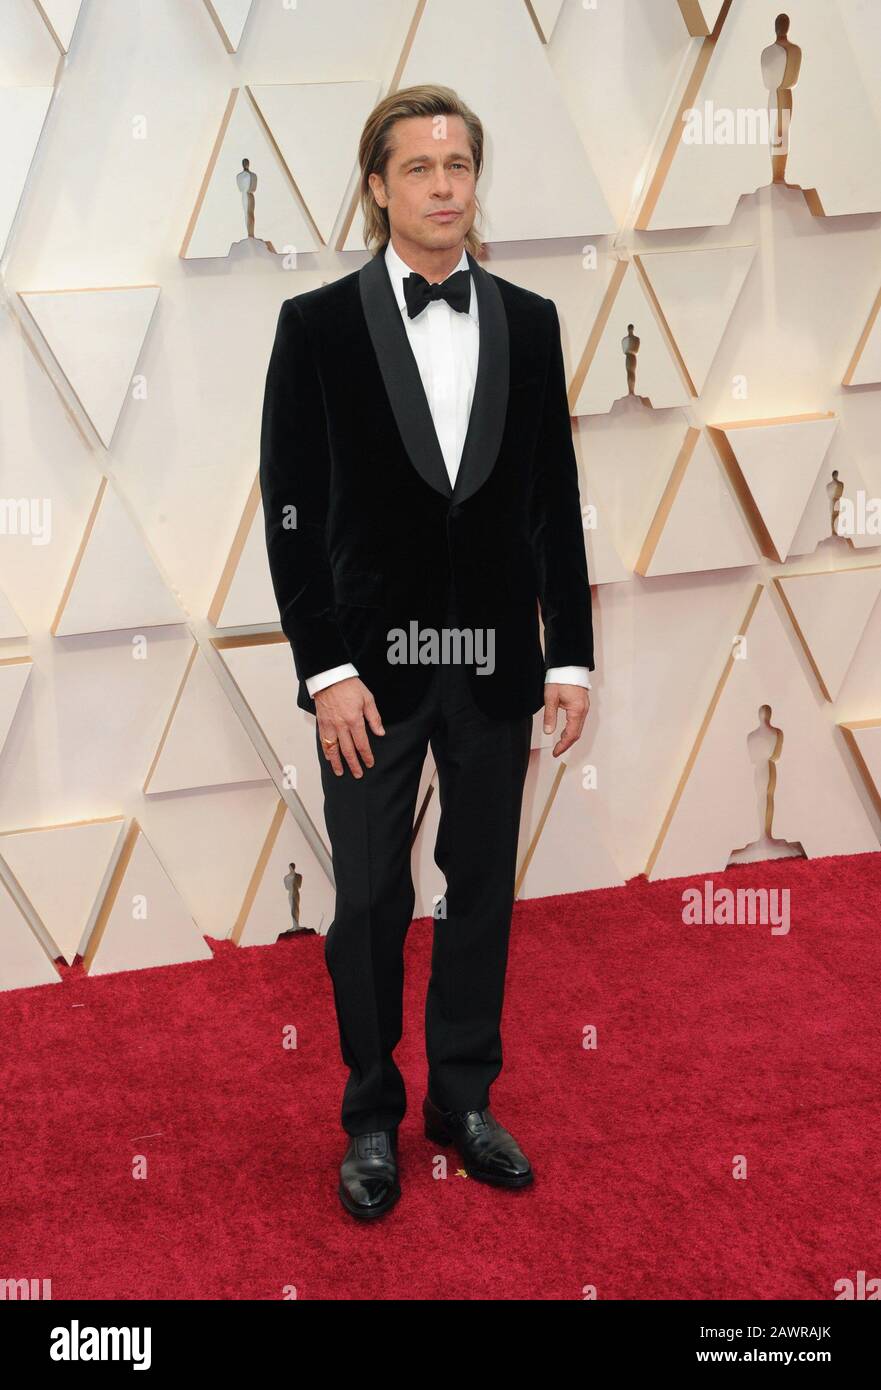 Los Angeles, CA. 9th Feb, 2020. Brad Pitt at arrivals for The 92nd Academy Awards - Arrivals 3, The Dolby Theatre at Hollywood and Highland Center, Los Angeles, CA February 9, 2020. Credit: Elizabeth Goodenough/Everett Collection/Alamy Live News Stock Photo